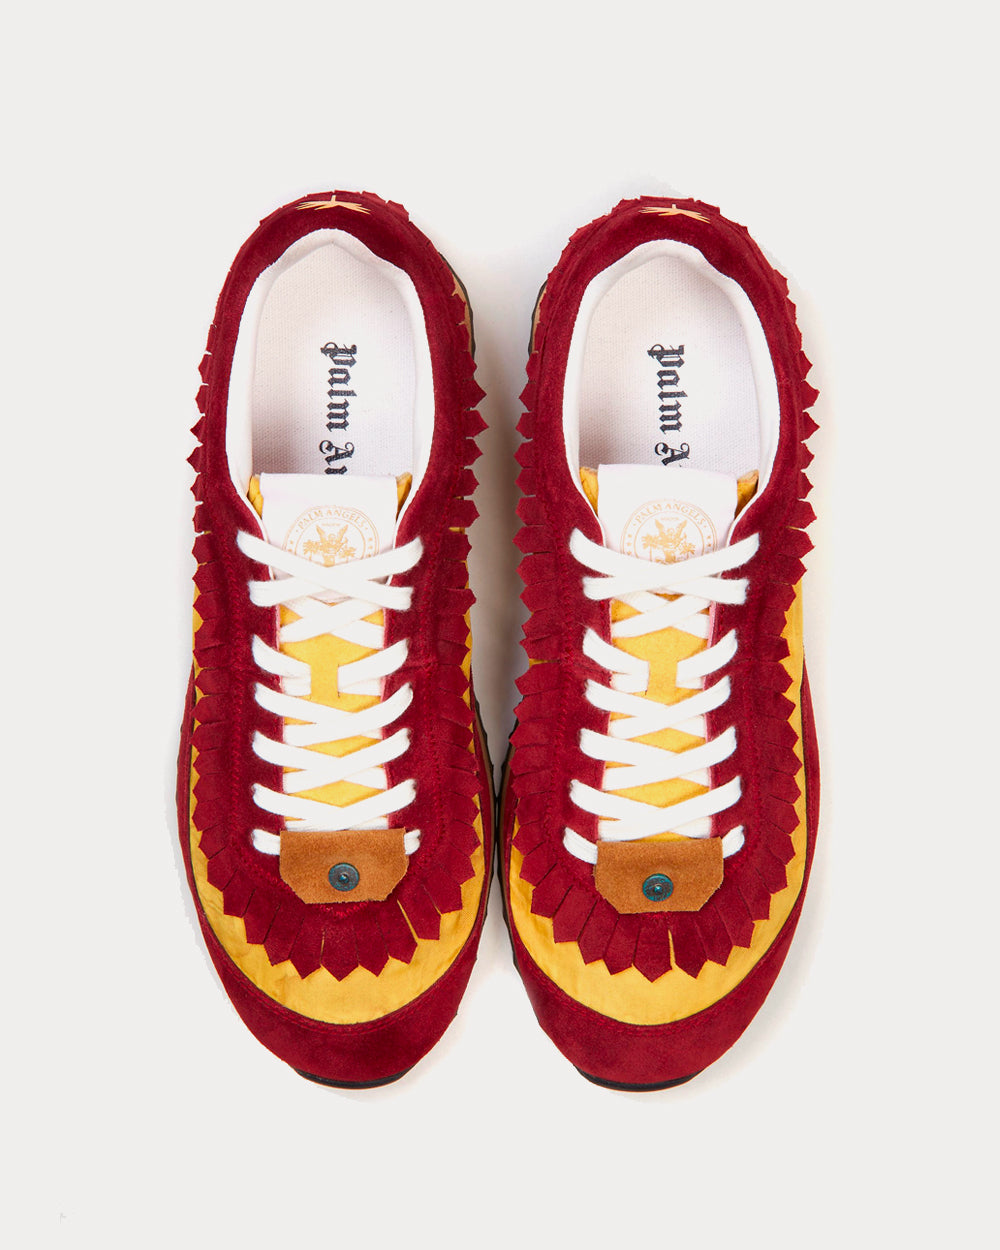 Palm Angels - Fringe Runner Burgundy / Yellow Low Top Sneakers